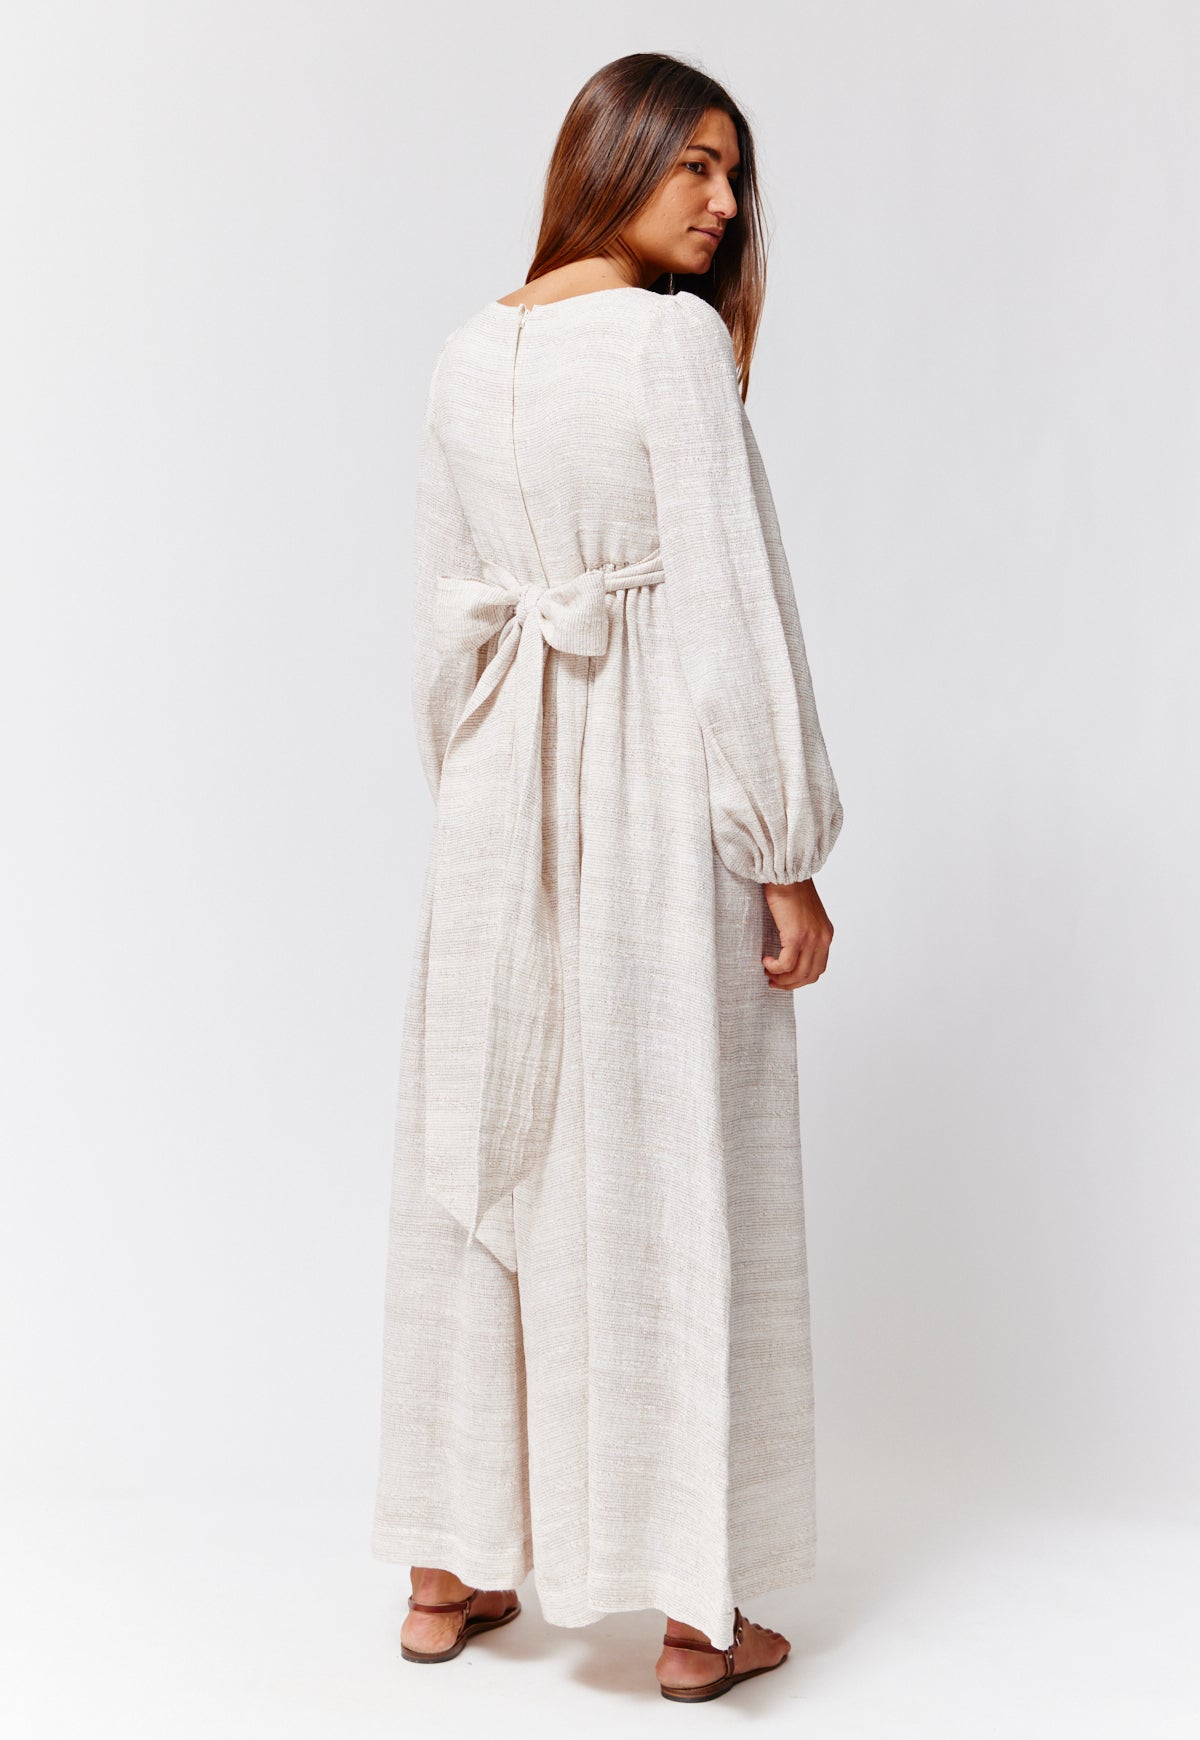 THE CAROLYN DRESS in NATURAL STRIPED GAUZE